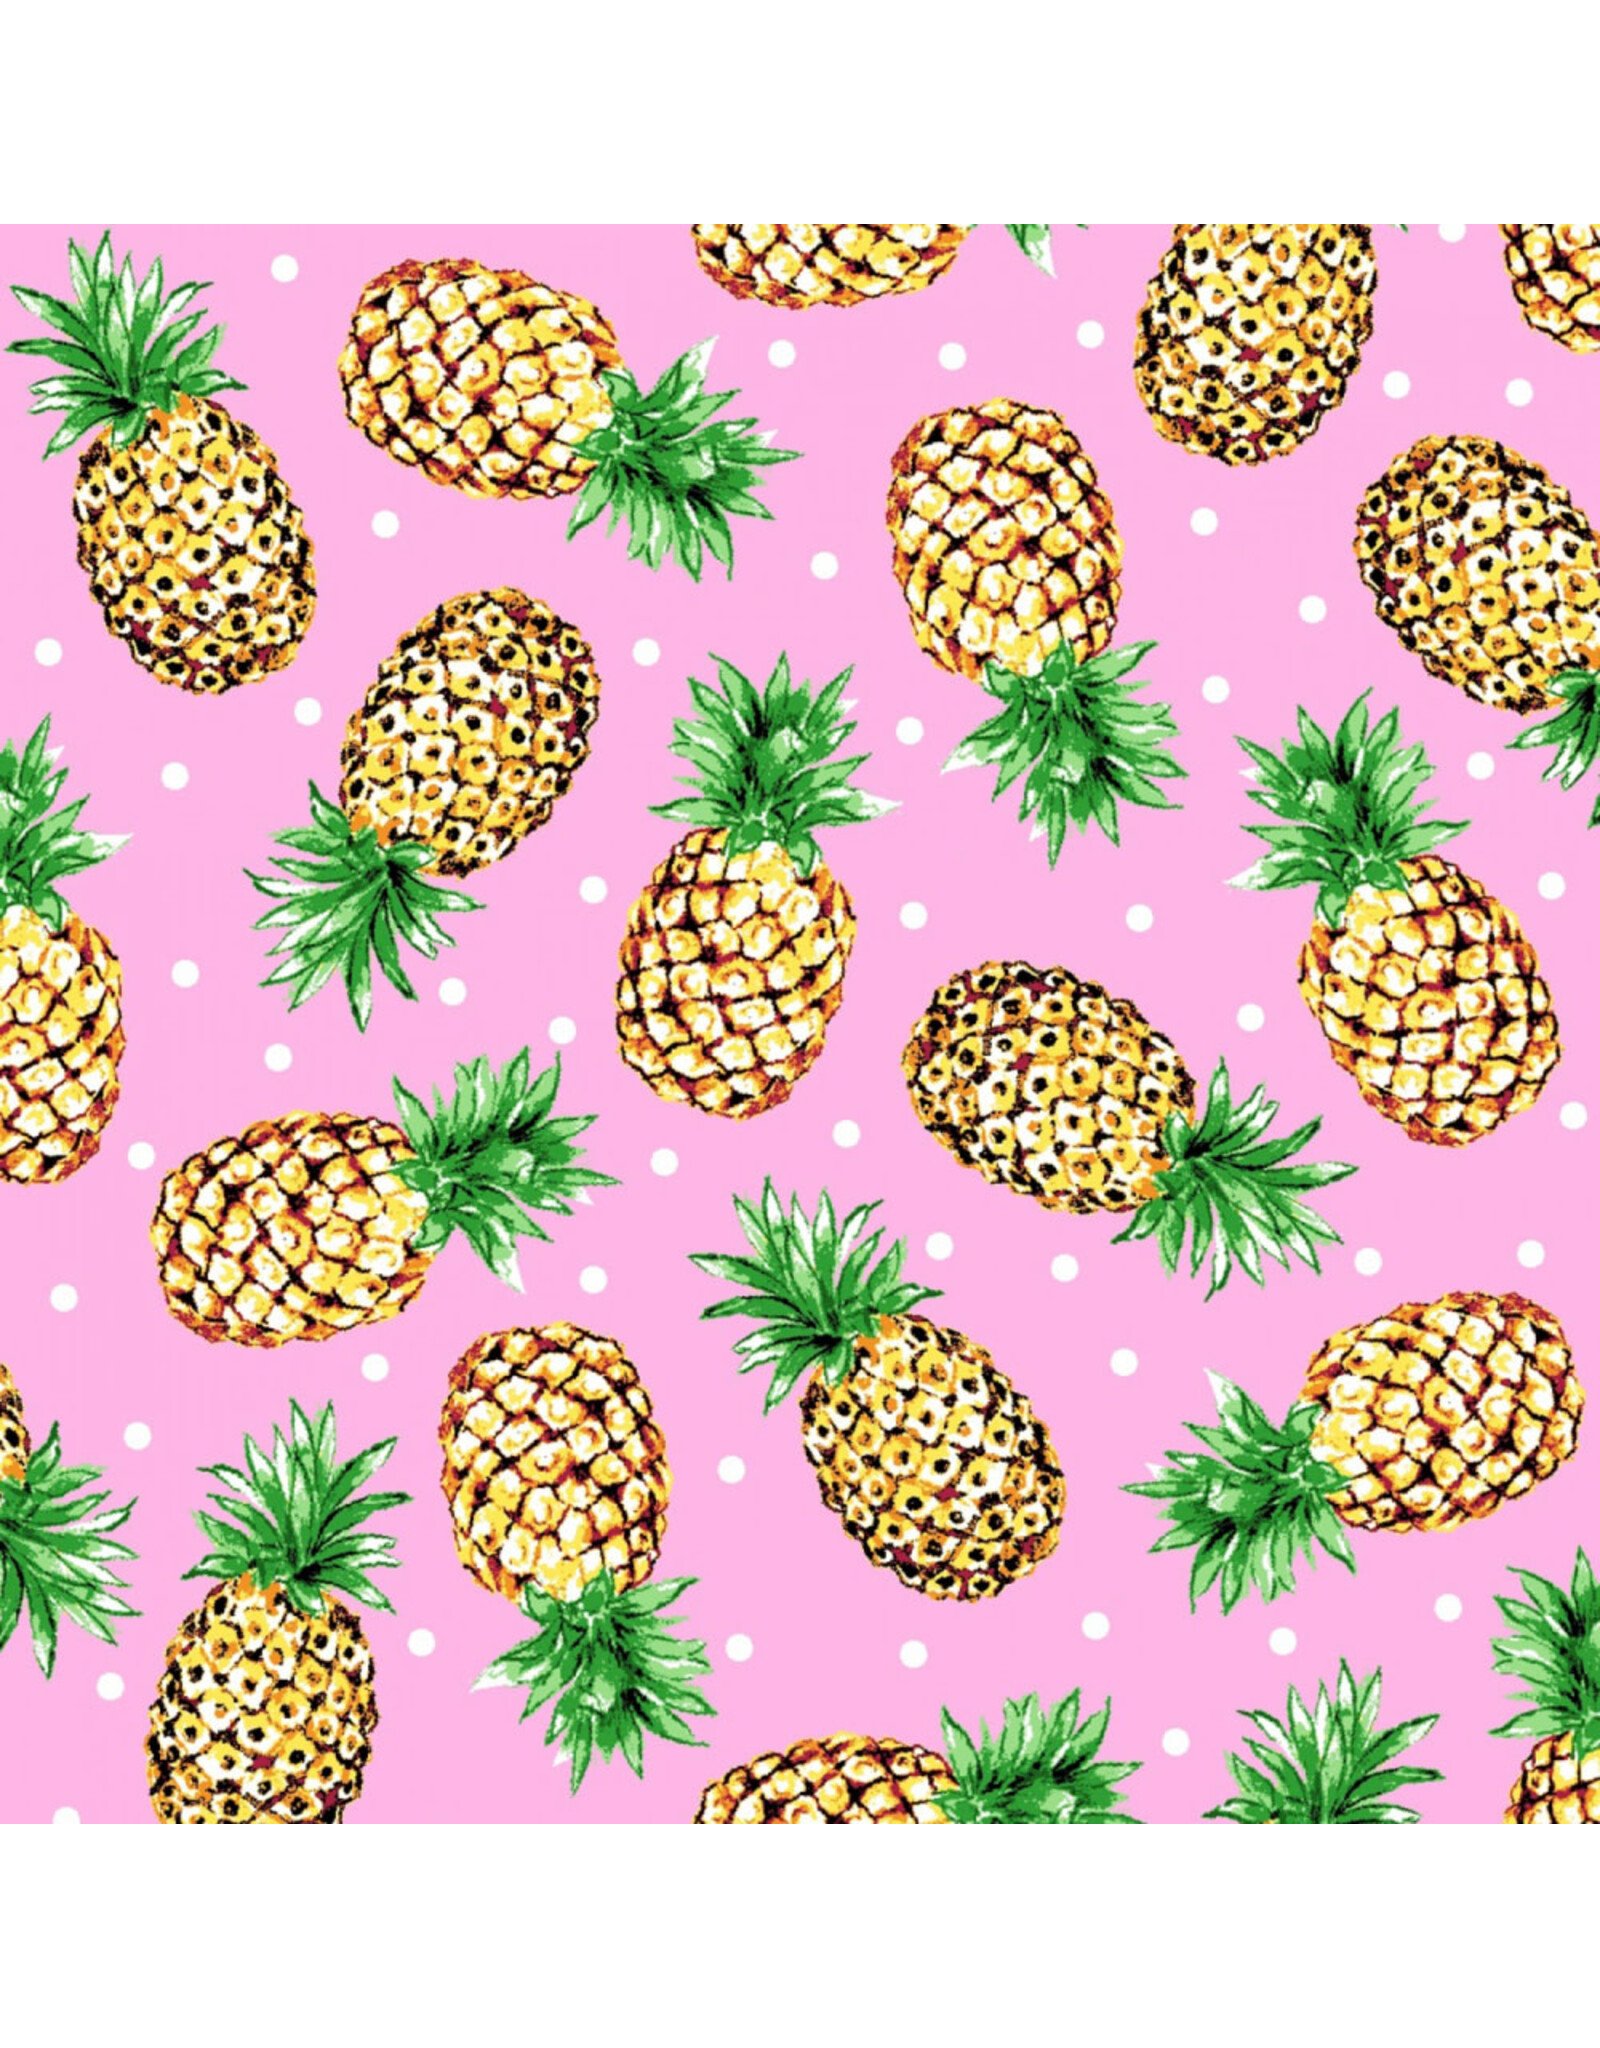 Freckle & Lollie Tidbits, Surfside Pineapples in Pink, Fabric Half-Yards